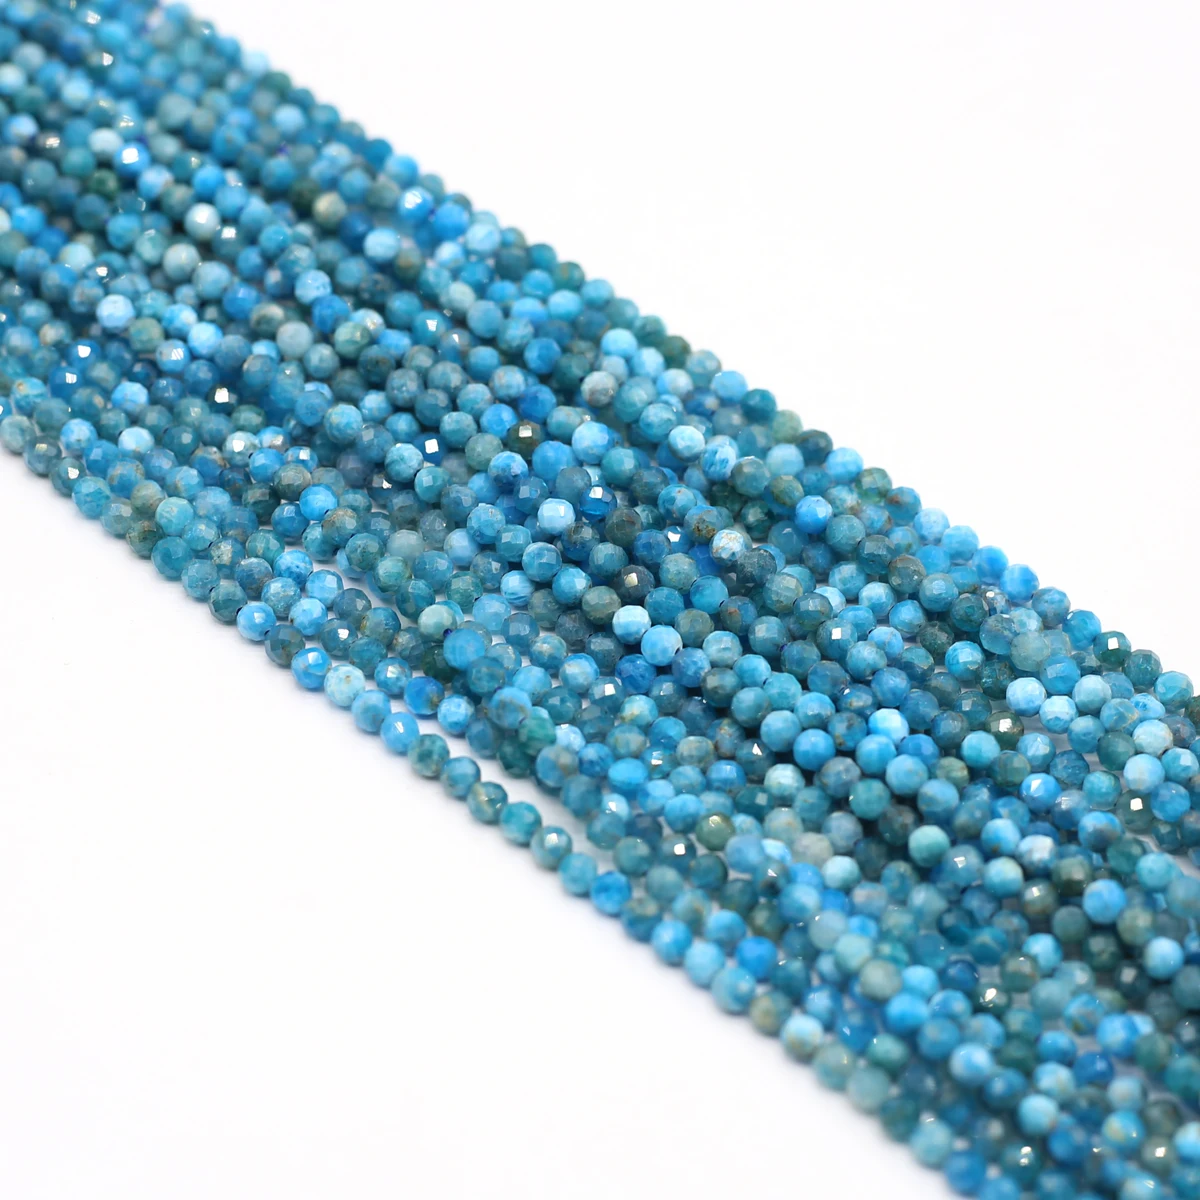 Купи 4mm Faceted Natural Stone Round Blue Apatite Loose Spacer Beads for Jewelry Making DIY Bracelet Necklace Accessories Wholesale за 298 рублей в магазине AliExpress